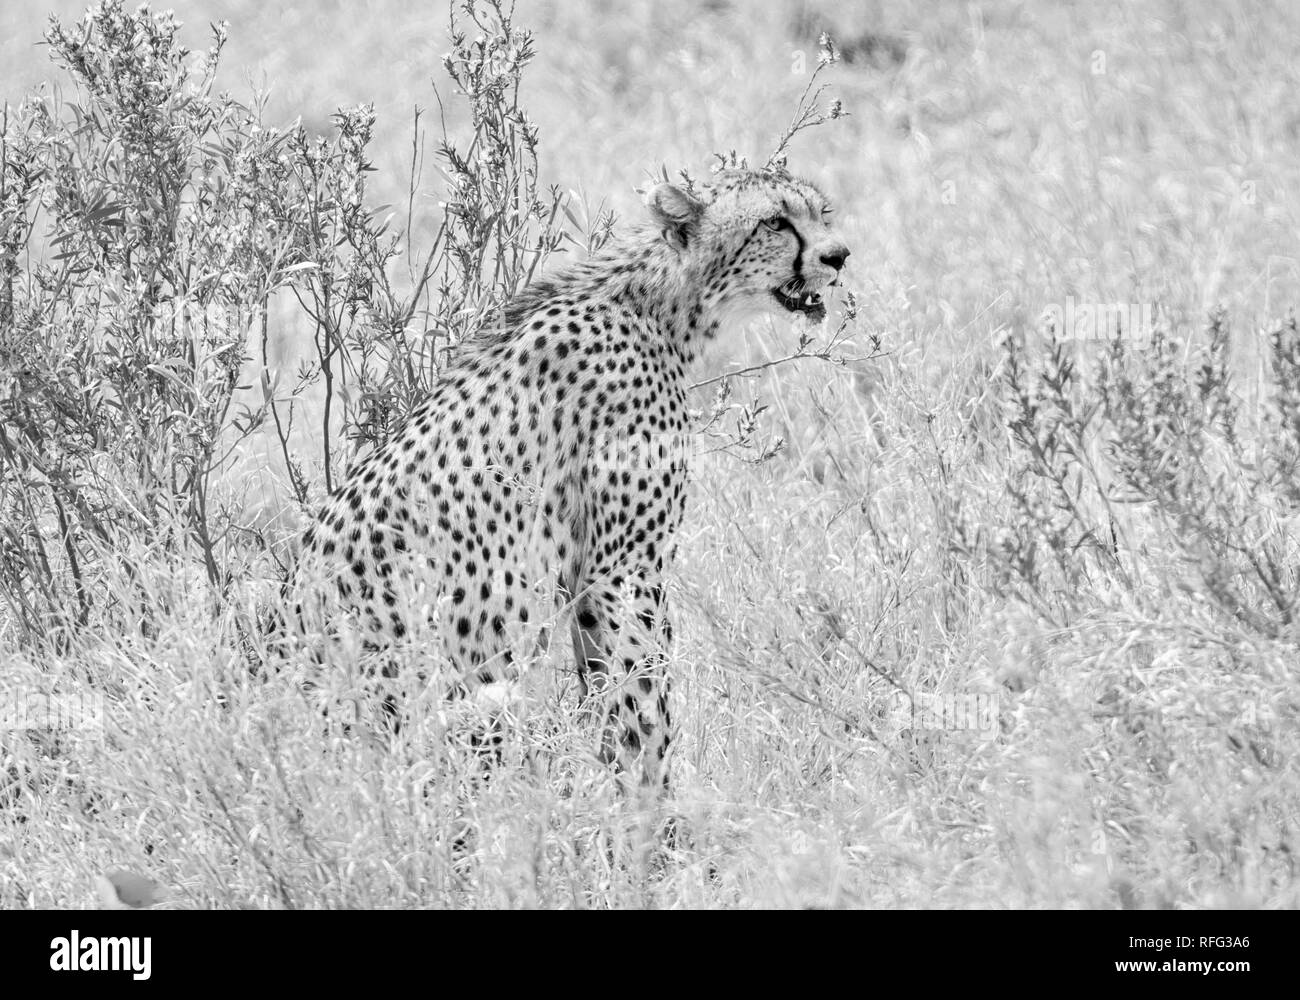 Cheetah face Black and White Stock Photos & Images - Alamy